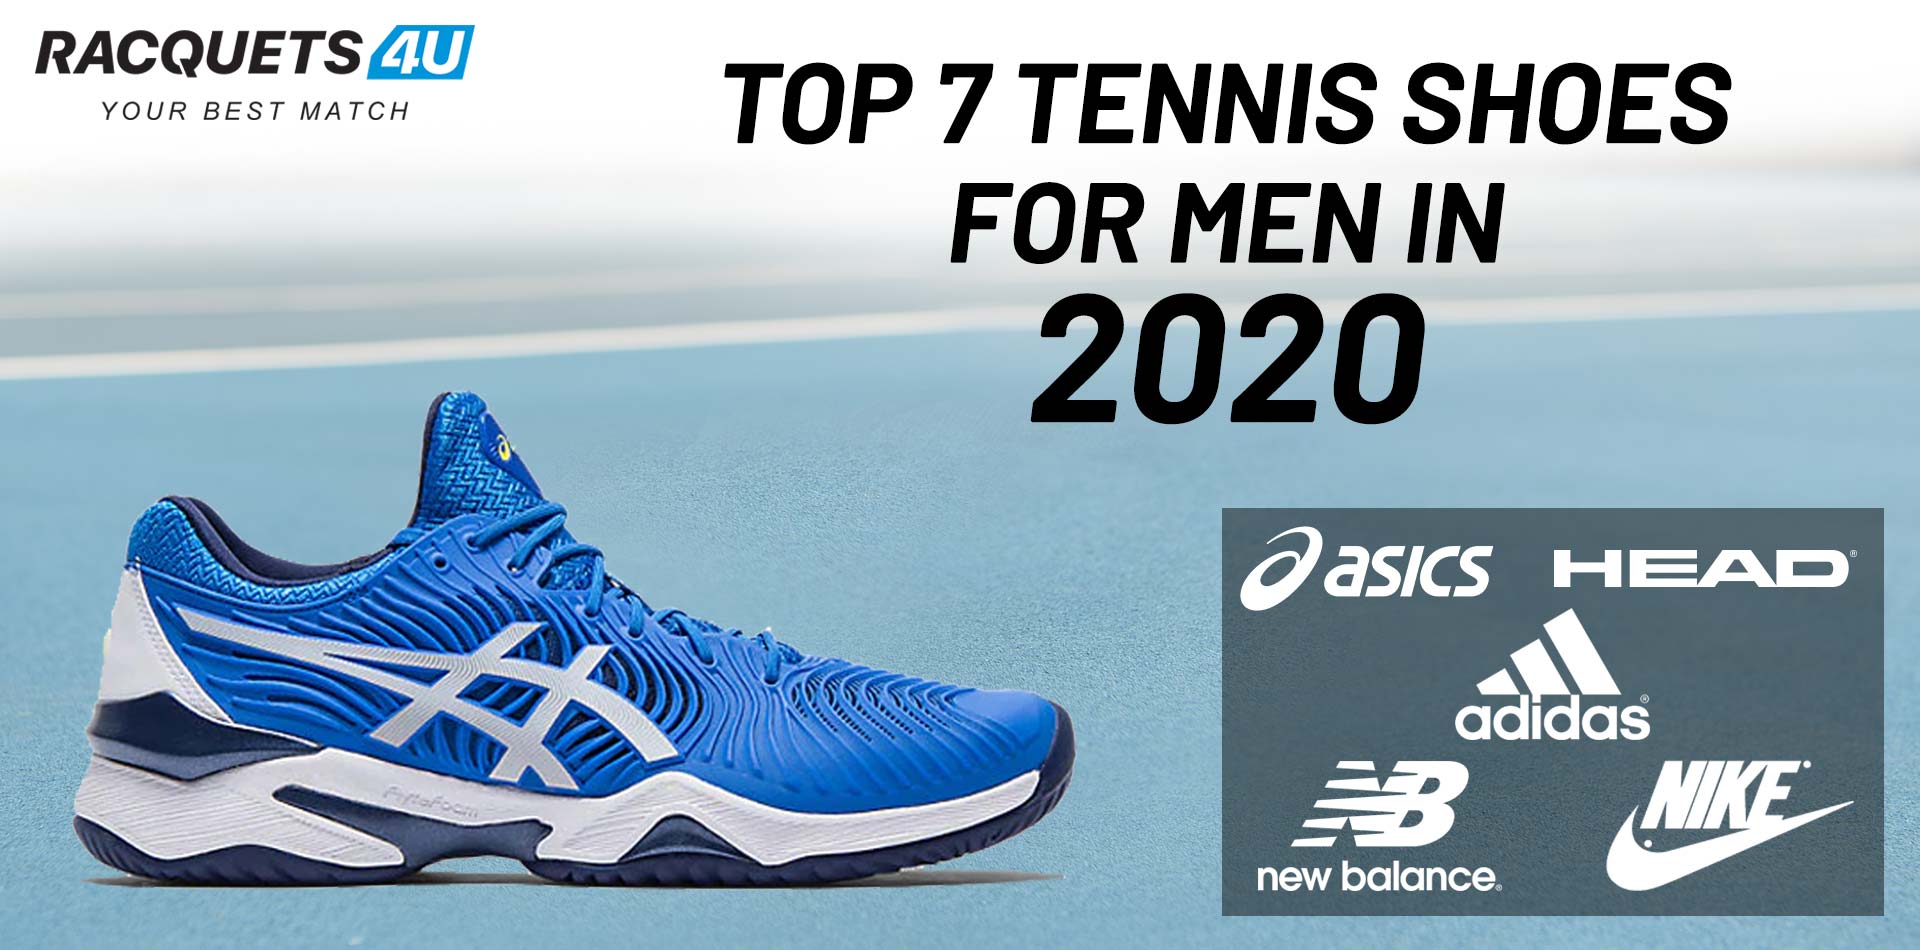 Top 7 Tennis Shoes for Men in 2020